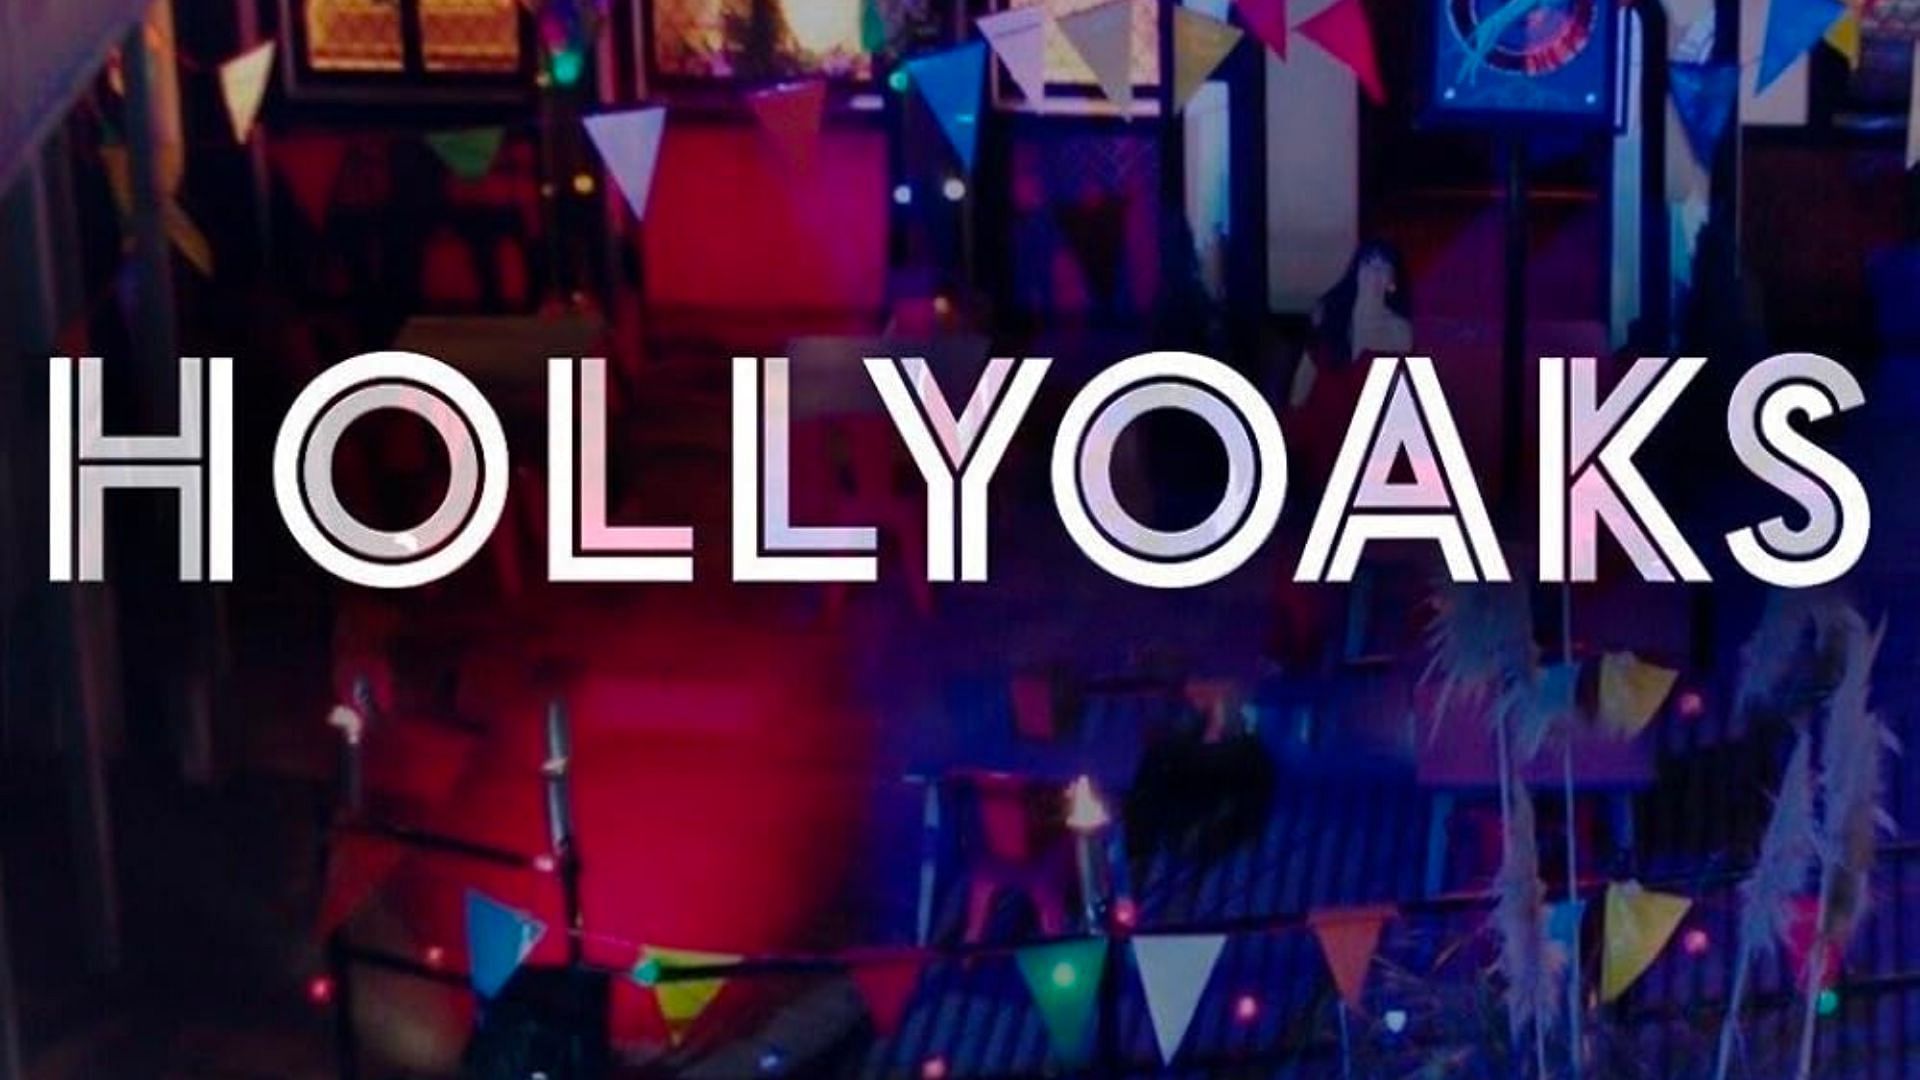 Hollyoaks has been on air since 1995 (Image via Channel 4/E4)